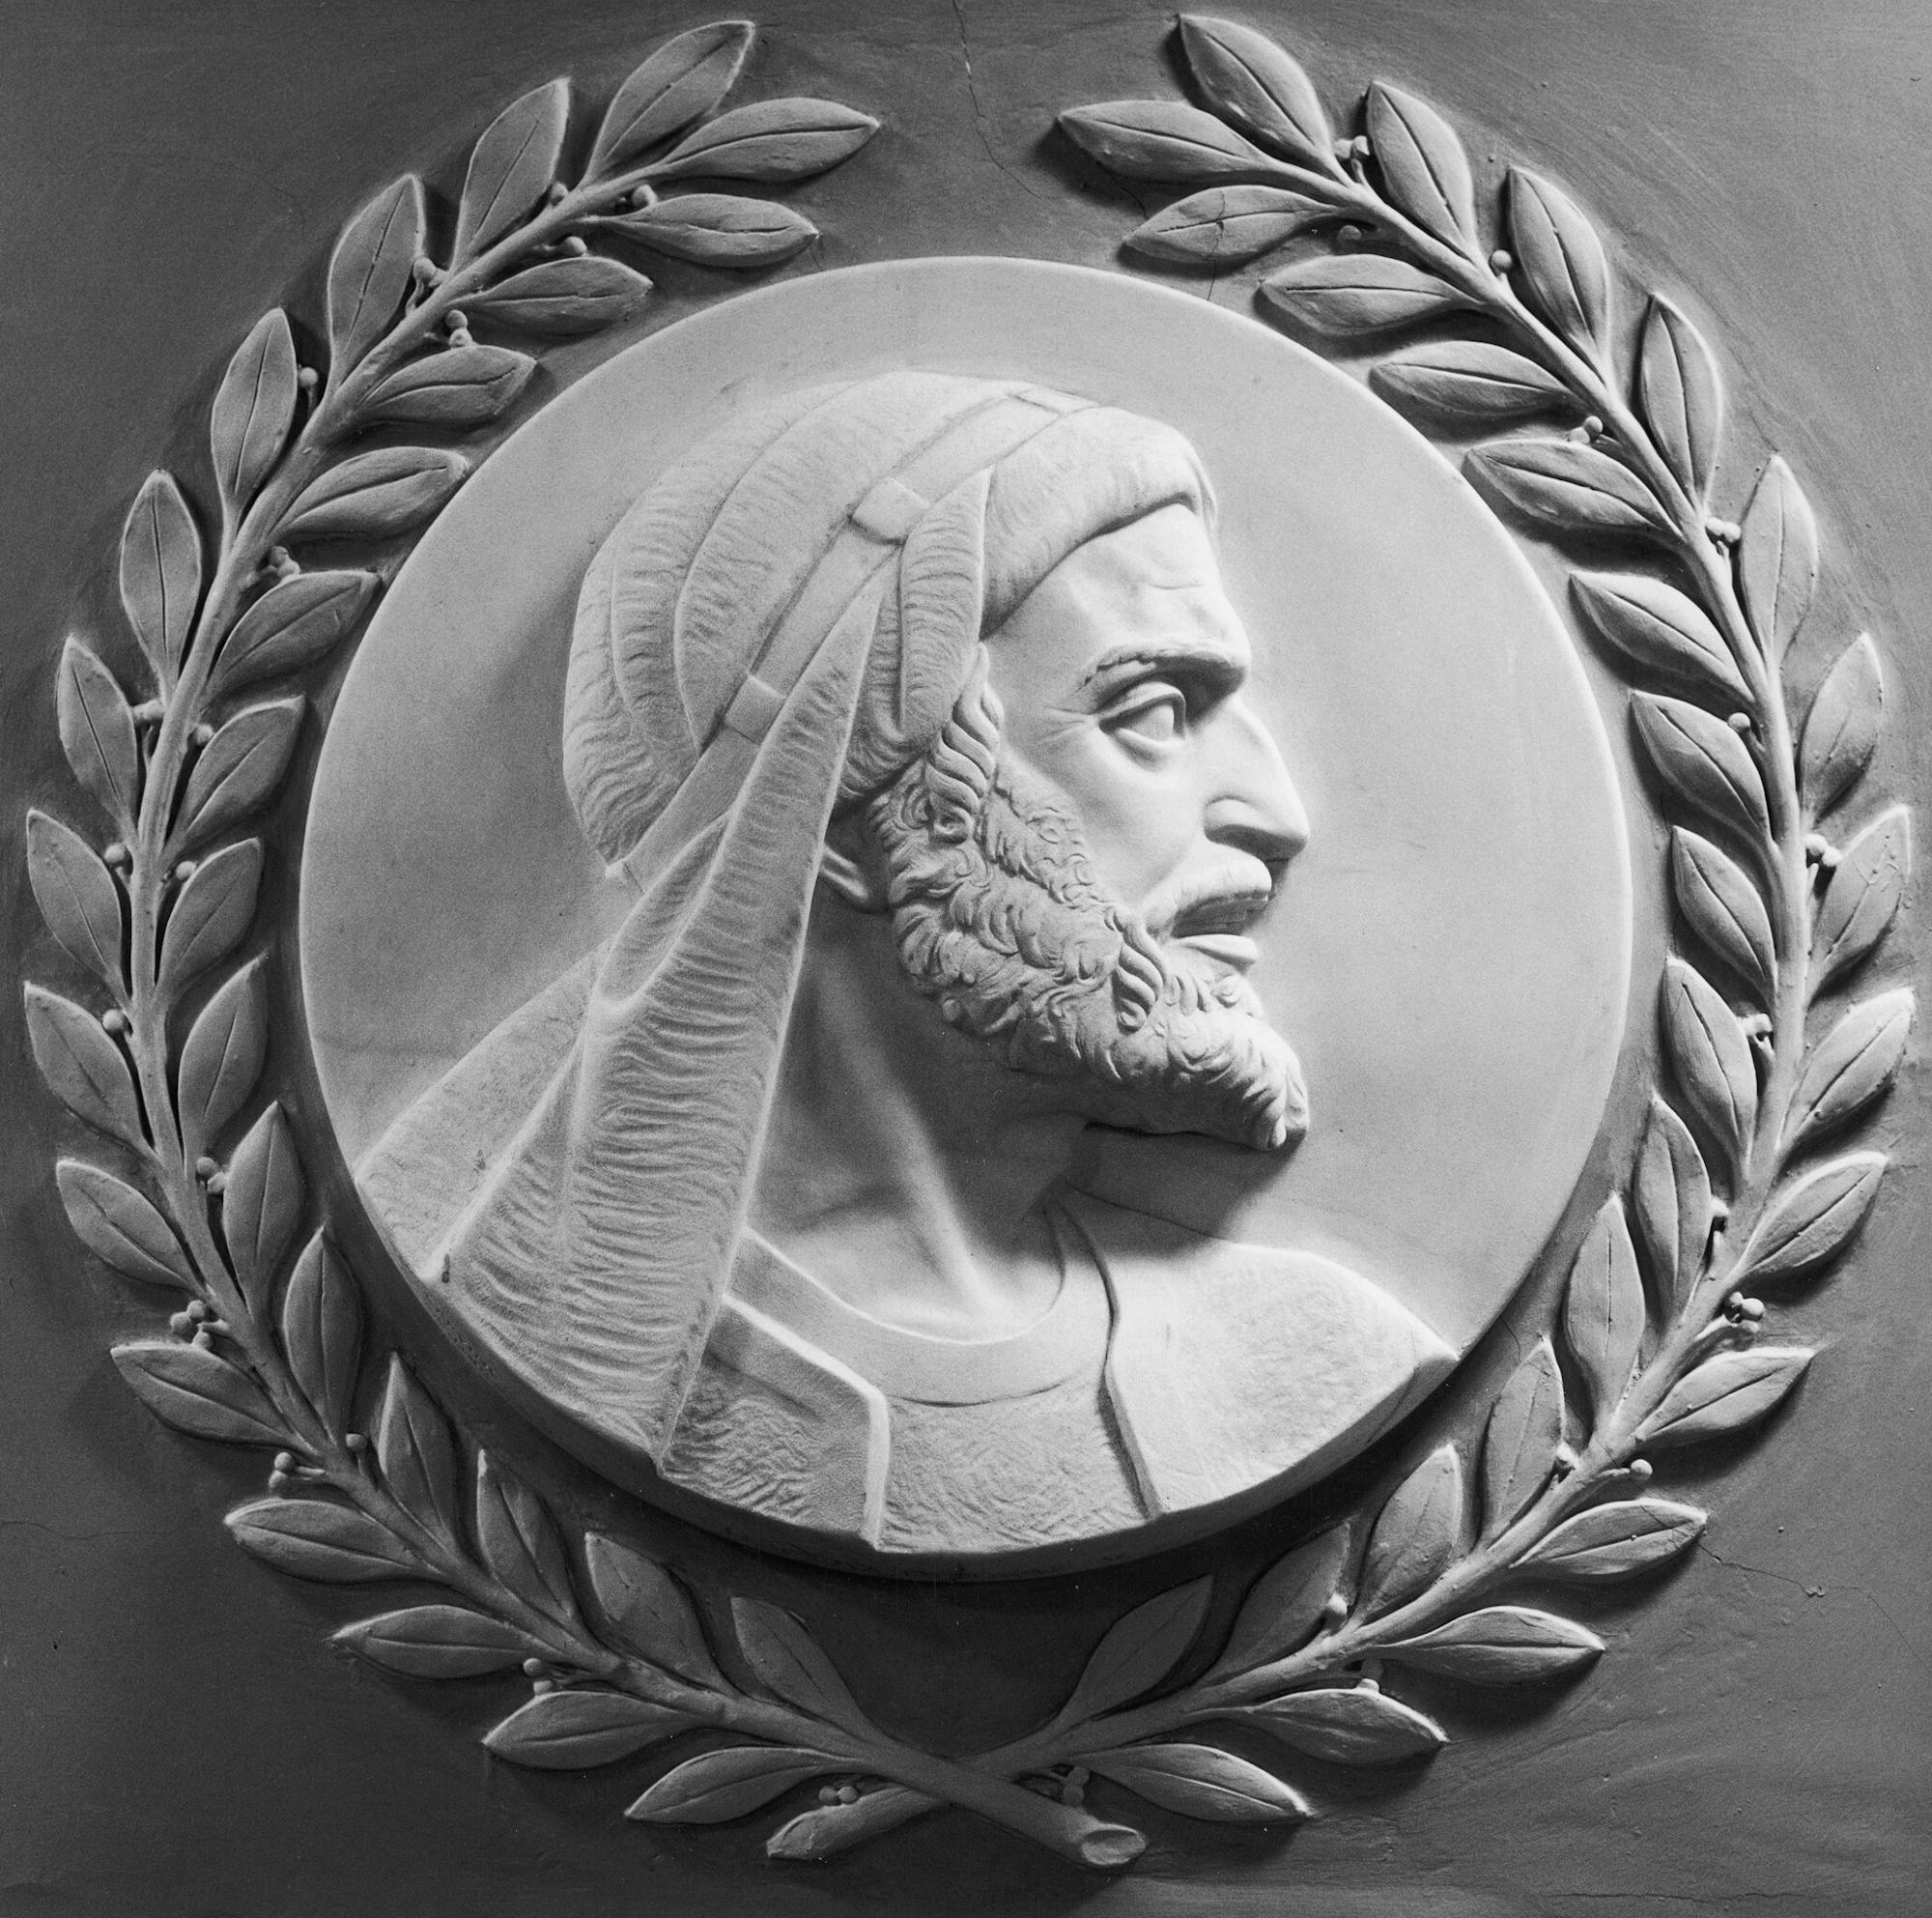 as a rabbi, philosopher and physician, maimonides wrestled with religion and reason – the book he wrote to reconcile them, ‘guide to the perplexed,’ has sparked debate ever since